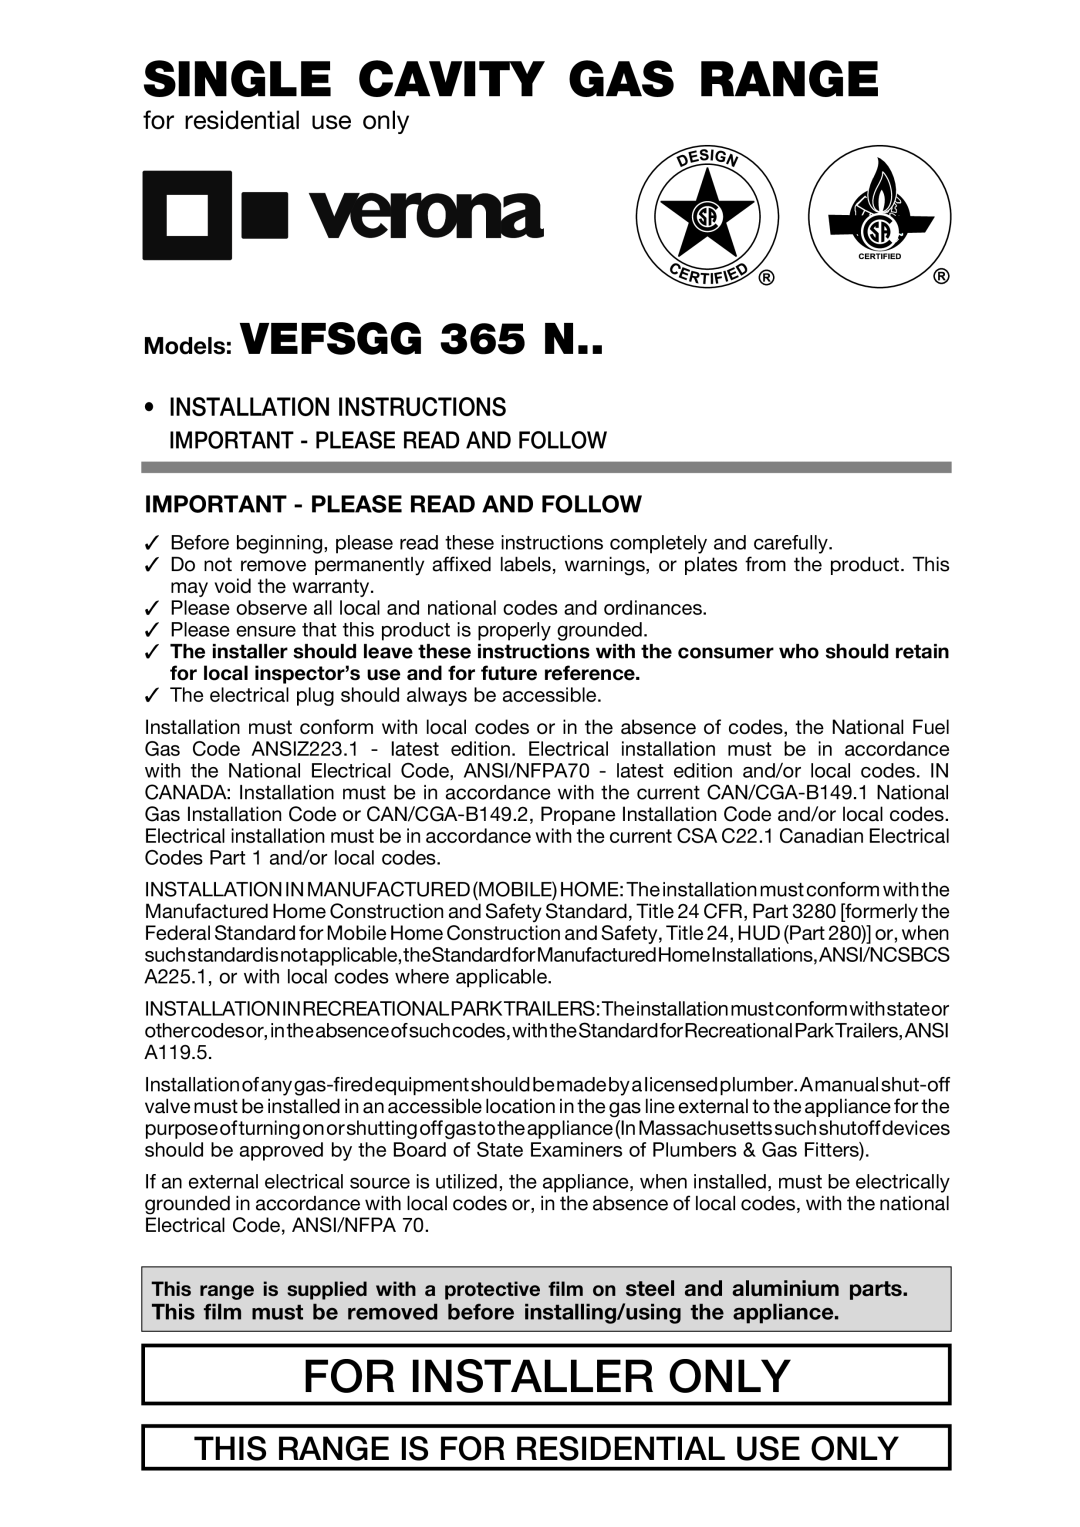 Verona VEFSGG 365 N warranty for residential use only, Installation Instructions, Important - Please Read And Follow 